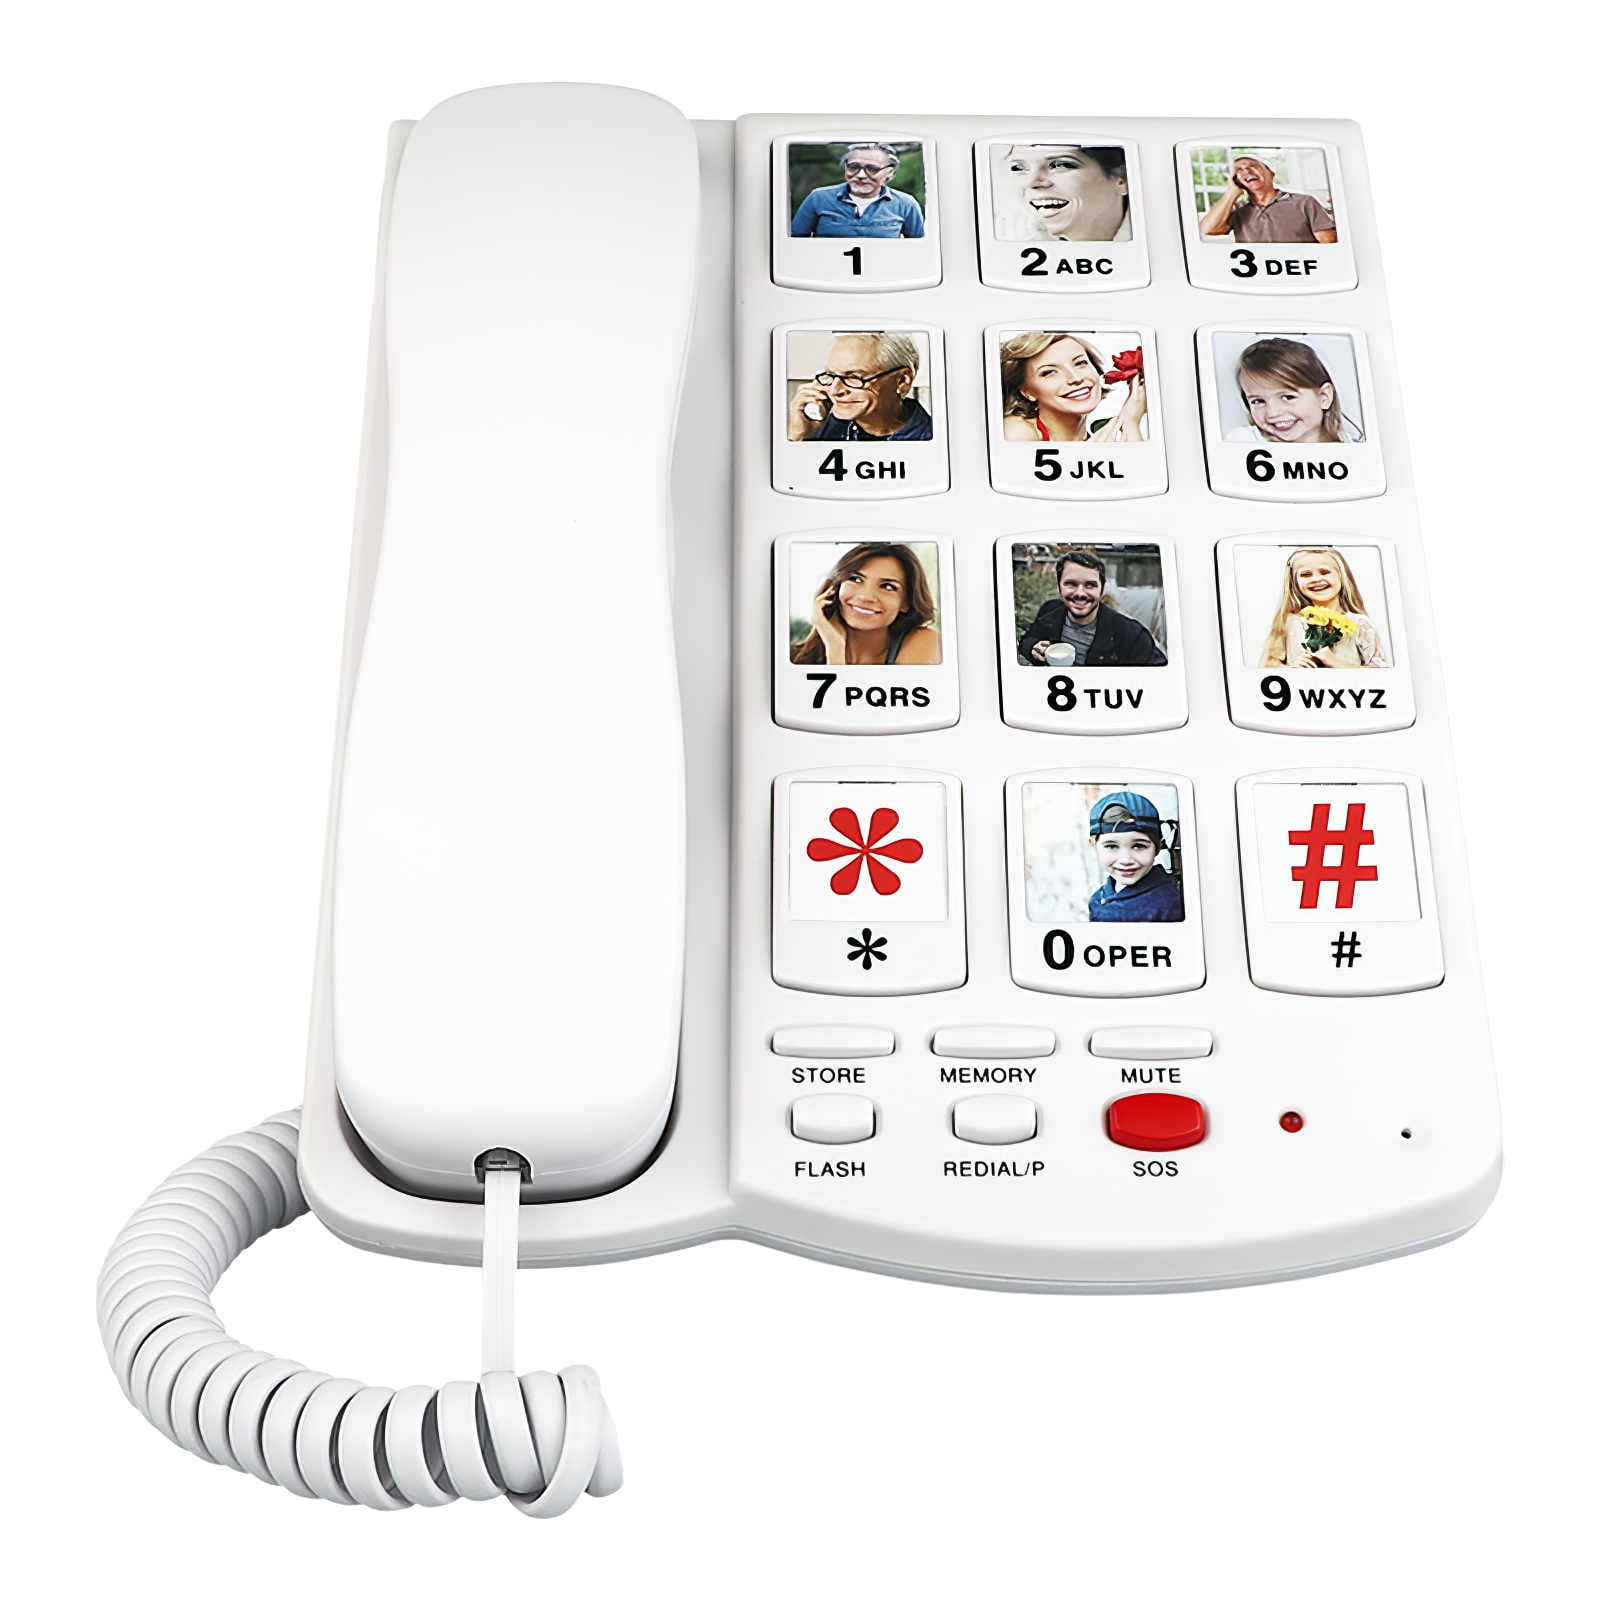 Big Button Corded Phone Amplified Hearing Caller ID Speakerphone FC-1507-LCD 